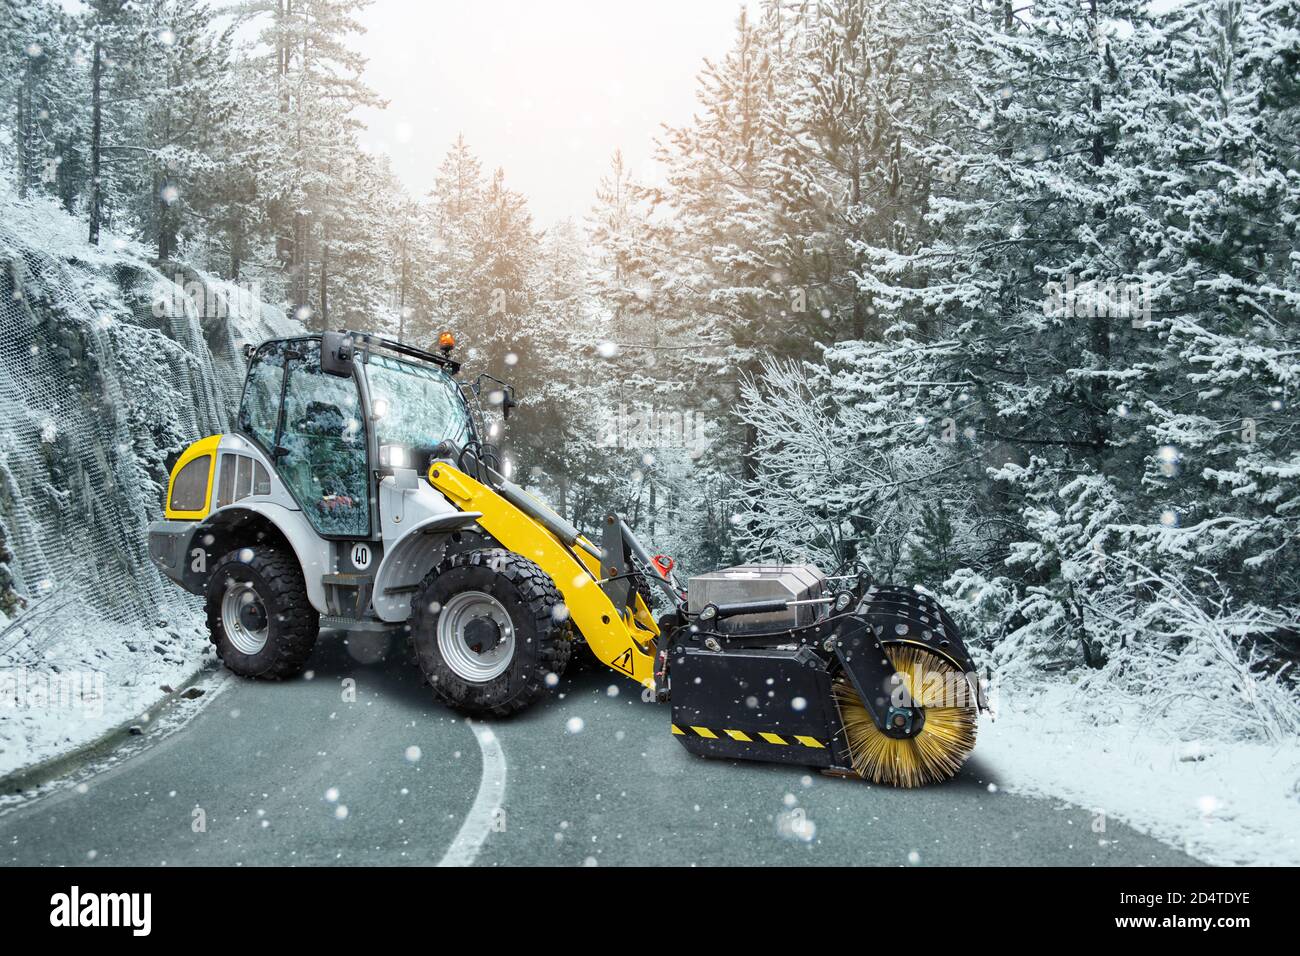 Snowblower machine for anti-icing treatment of winter road.  Stock Photo